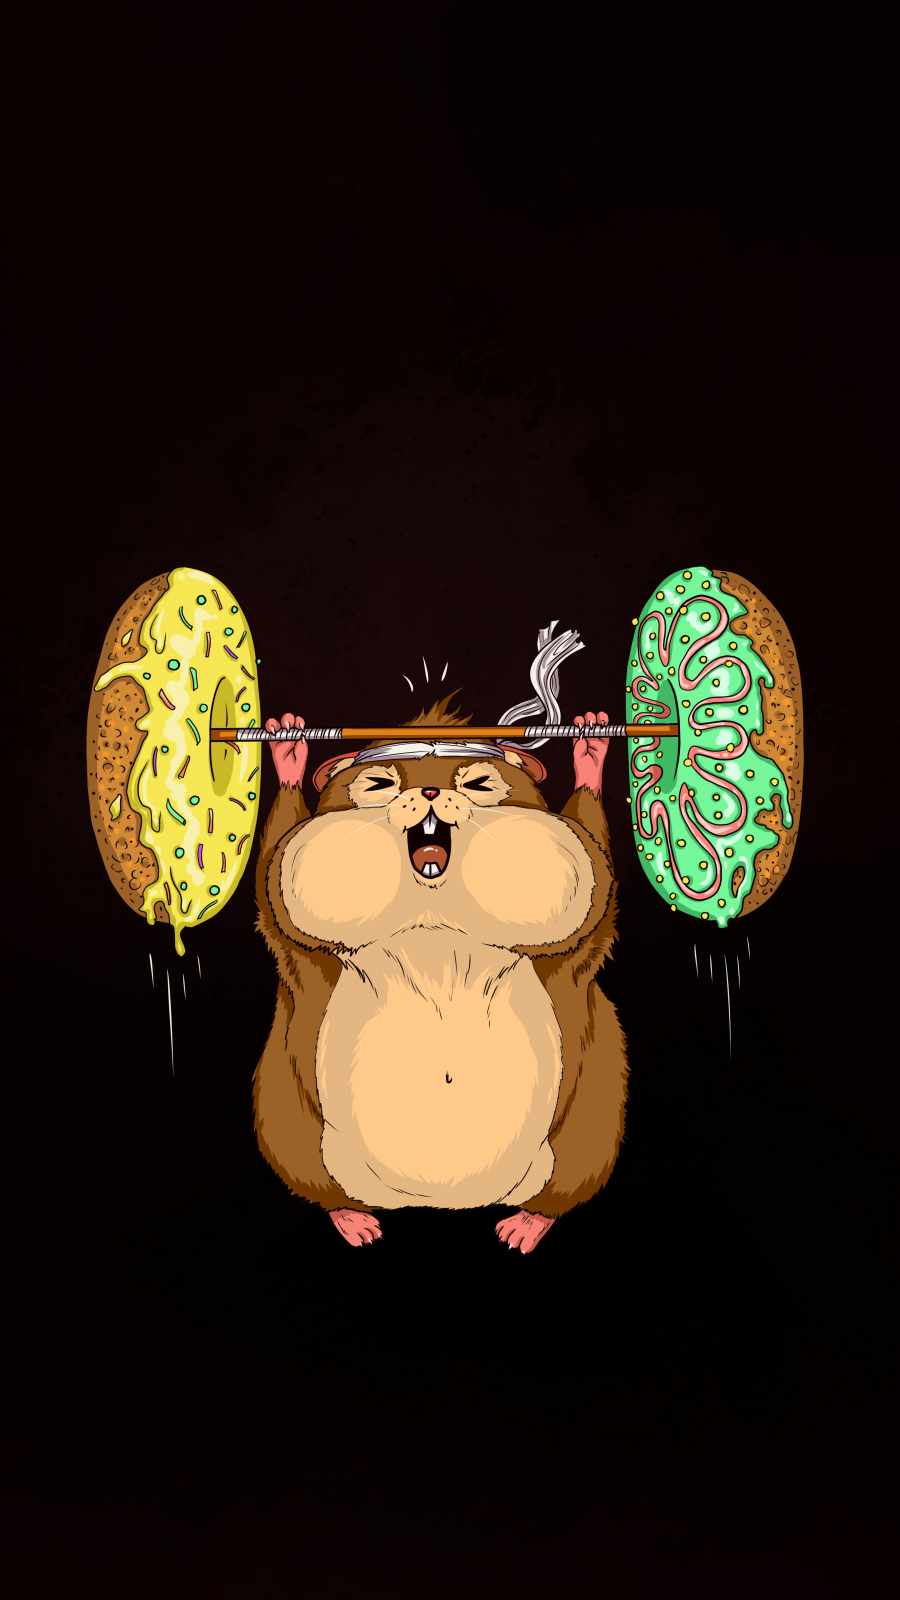 Donut Gym IPhone Wallpaper - IPhone Wallpapers : iPhone Wallpapers